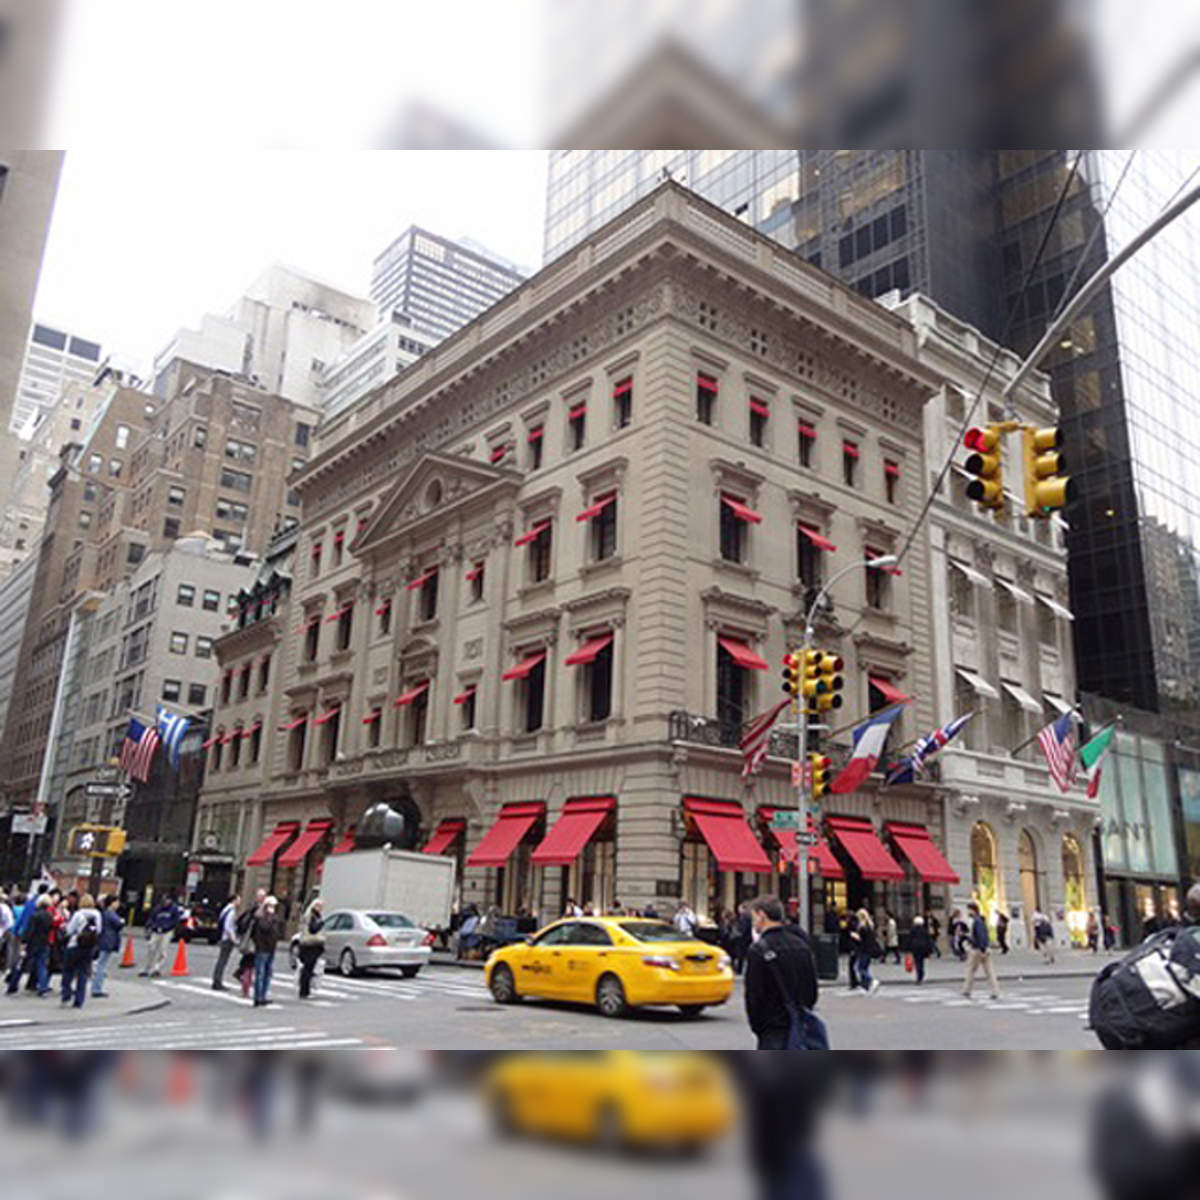 The Cartier store on 5th Avenue is one of the most beautiful